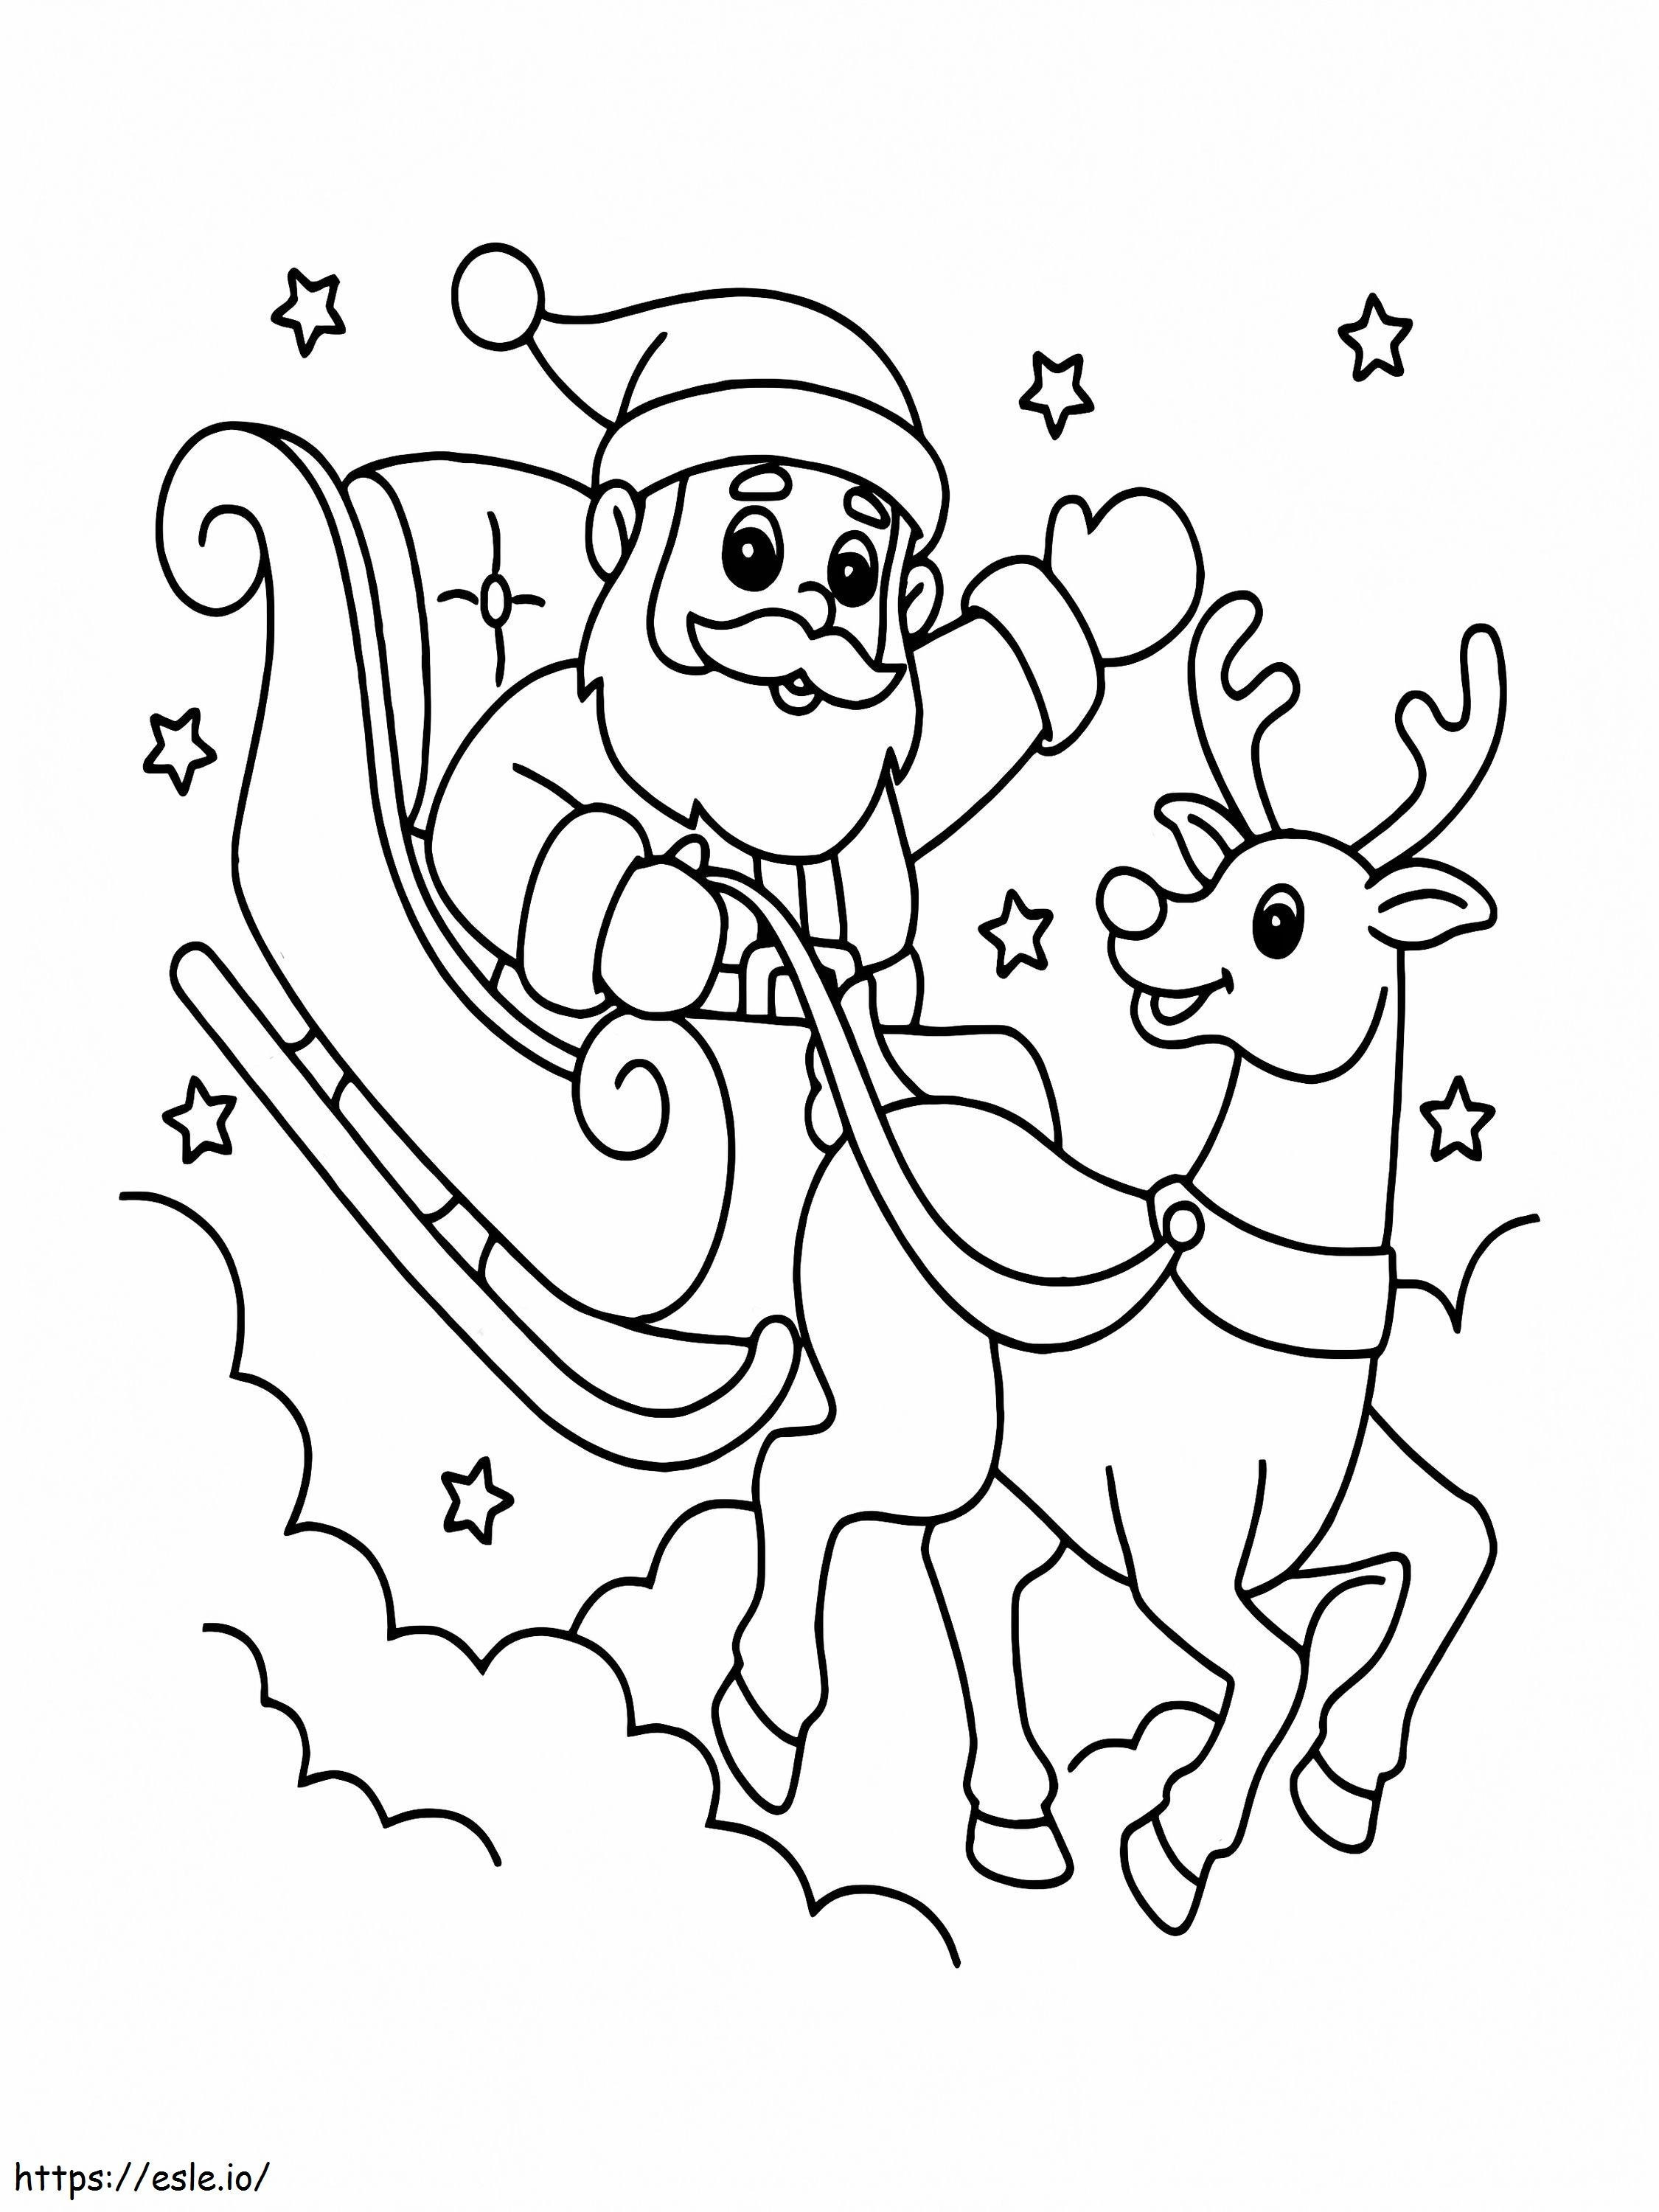 Santa Claus Riding In Sleigh coloring page